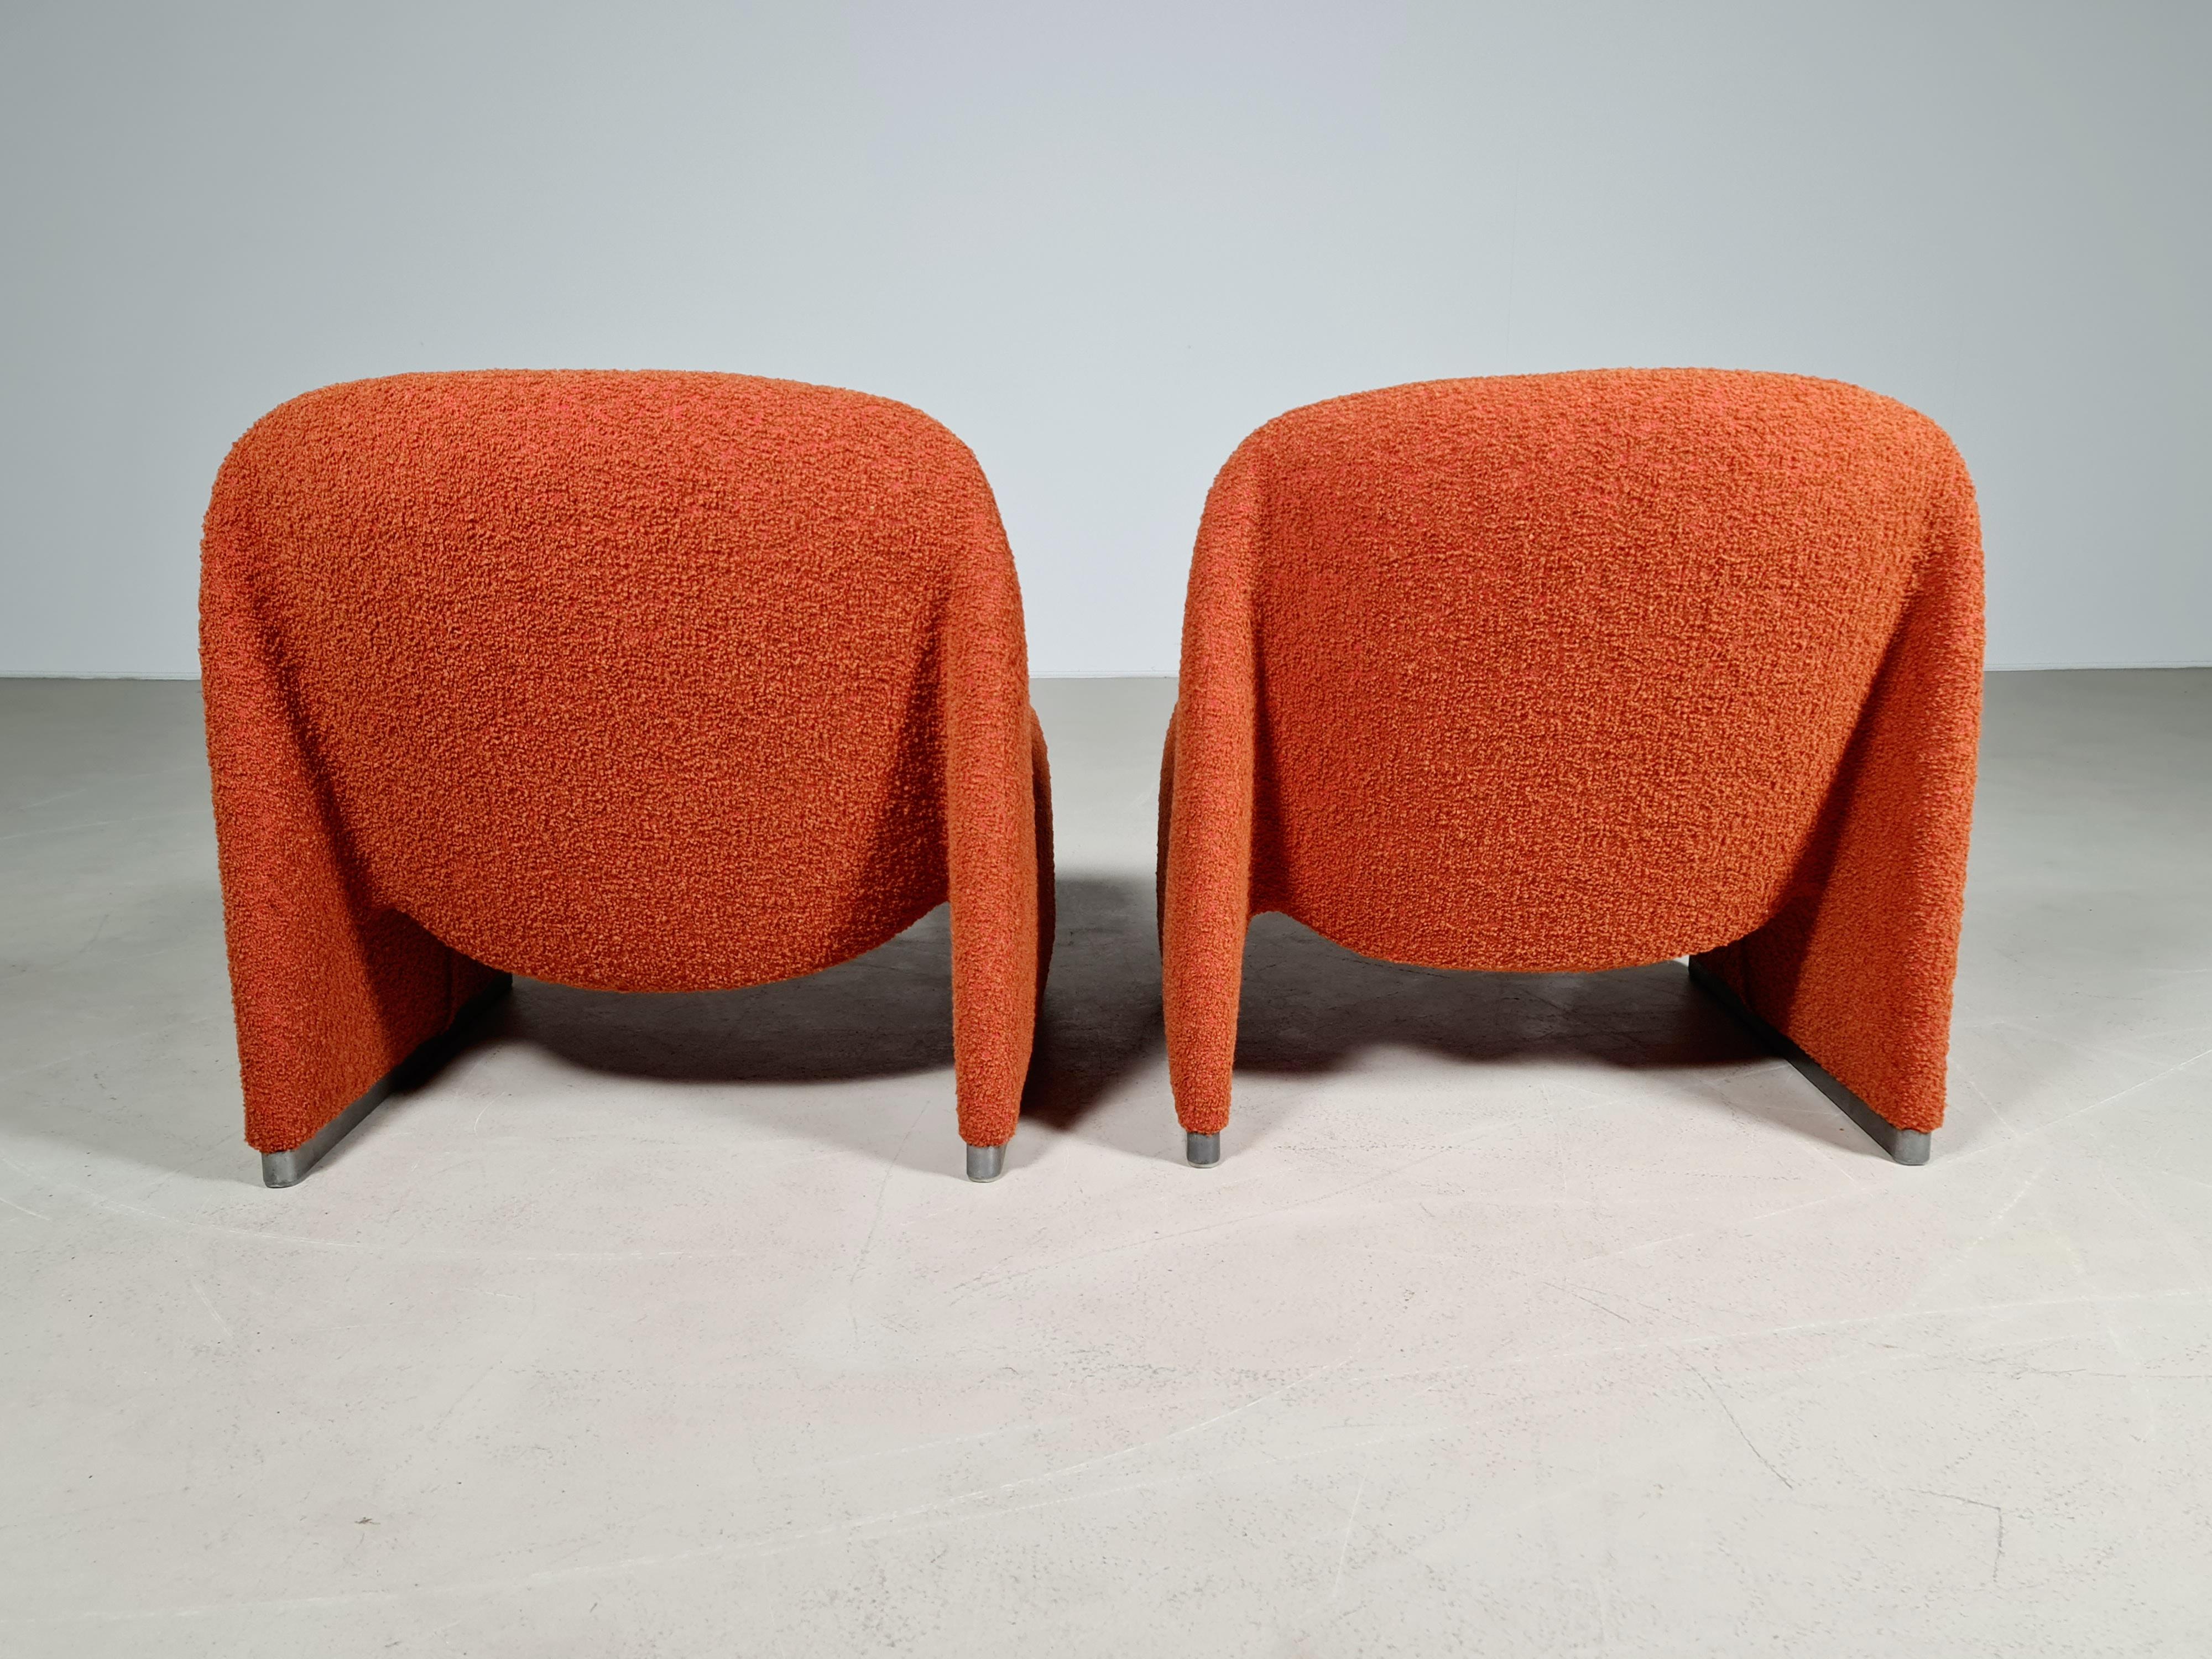 20th Century Set of 2 Alky Chairs by Giancarlo Piretti for Castelli, 1970s